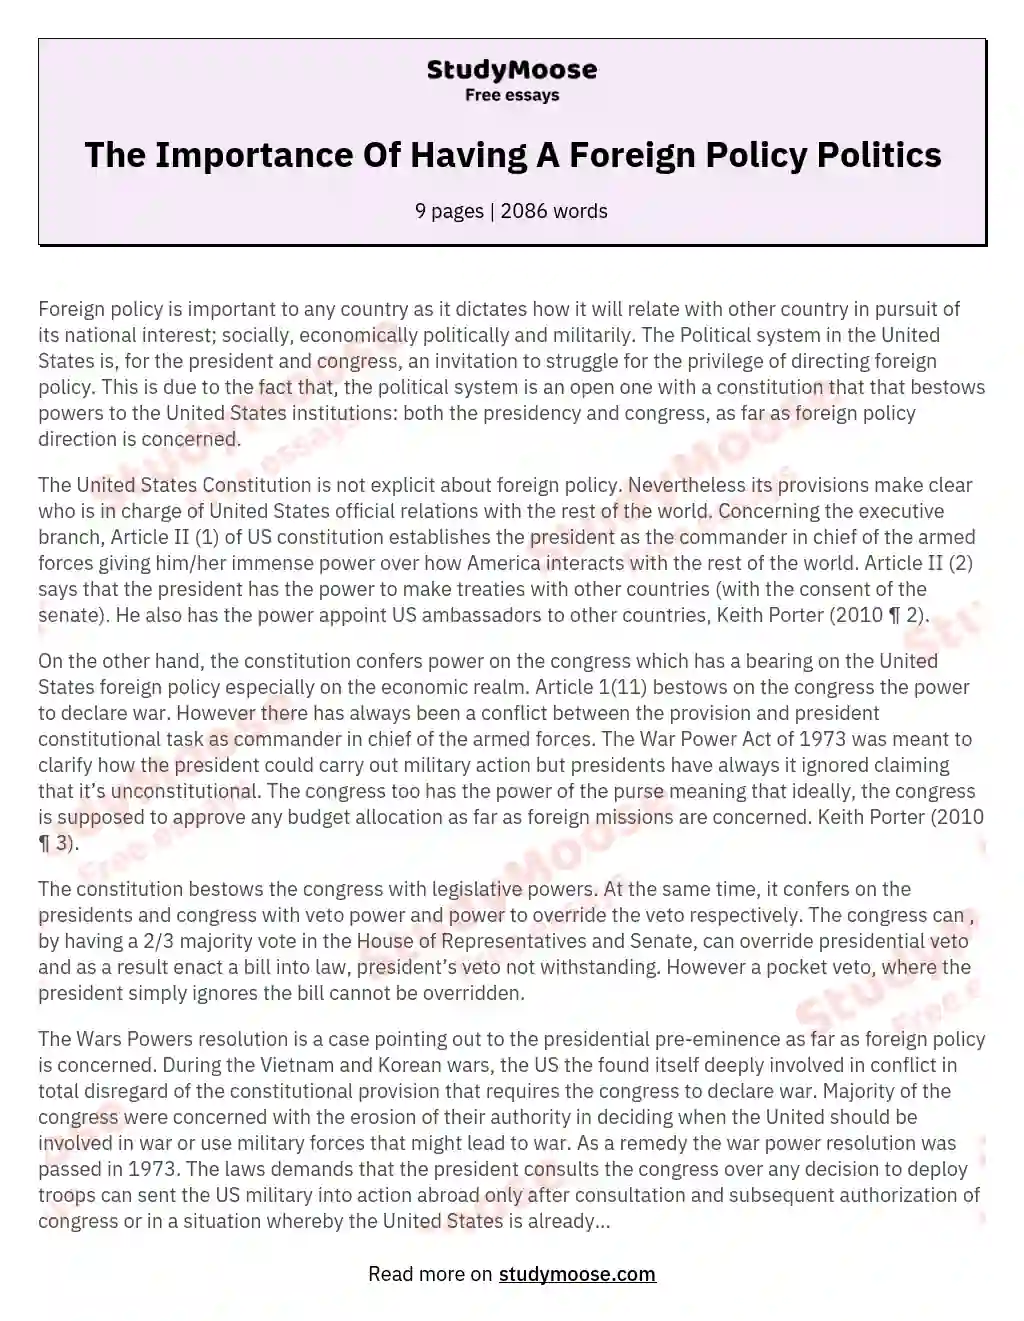 The Importance Of Having A Foreign Policy Politics essay